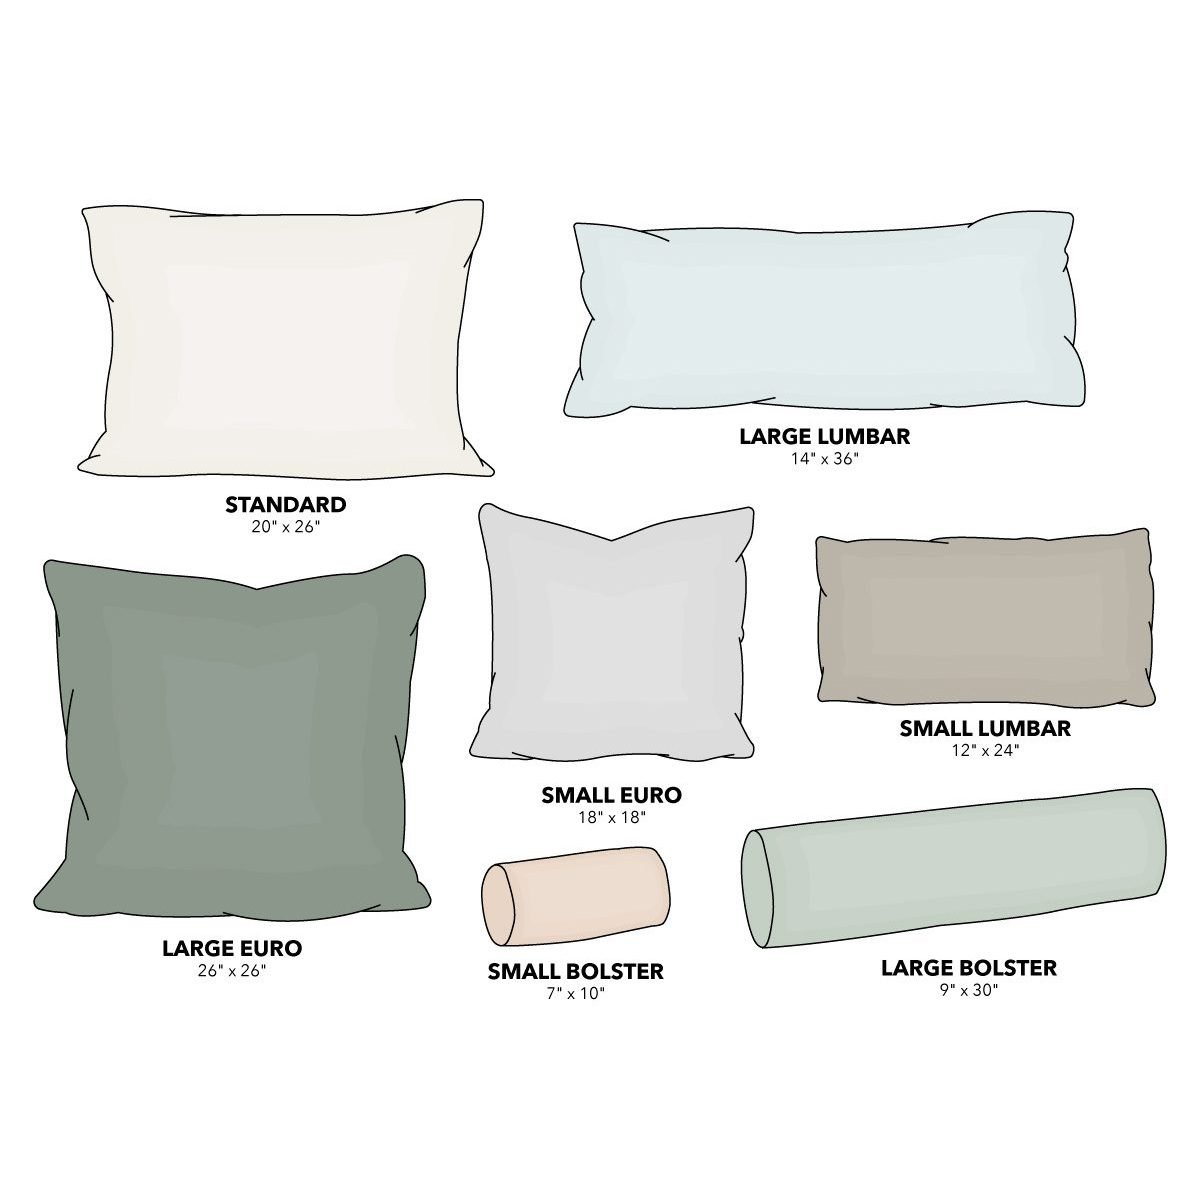 How to Arrange Pillows to Sit Up in Bed